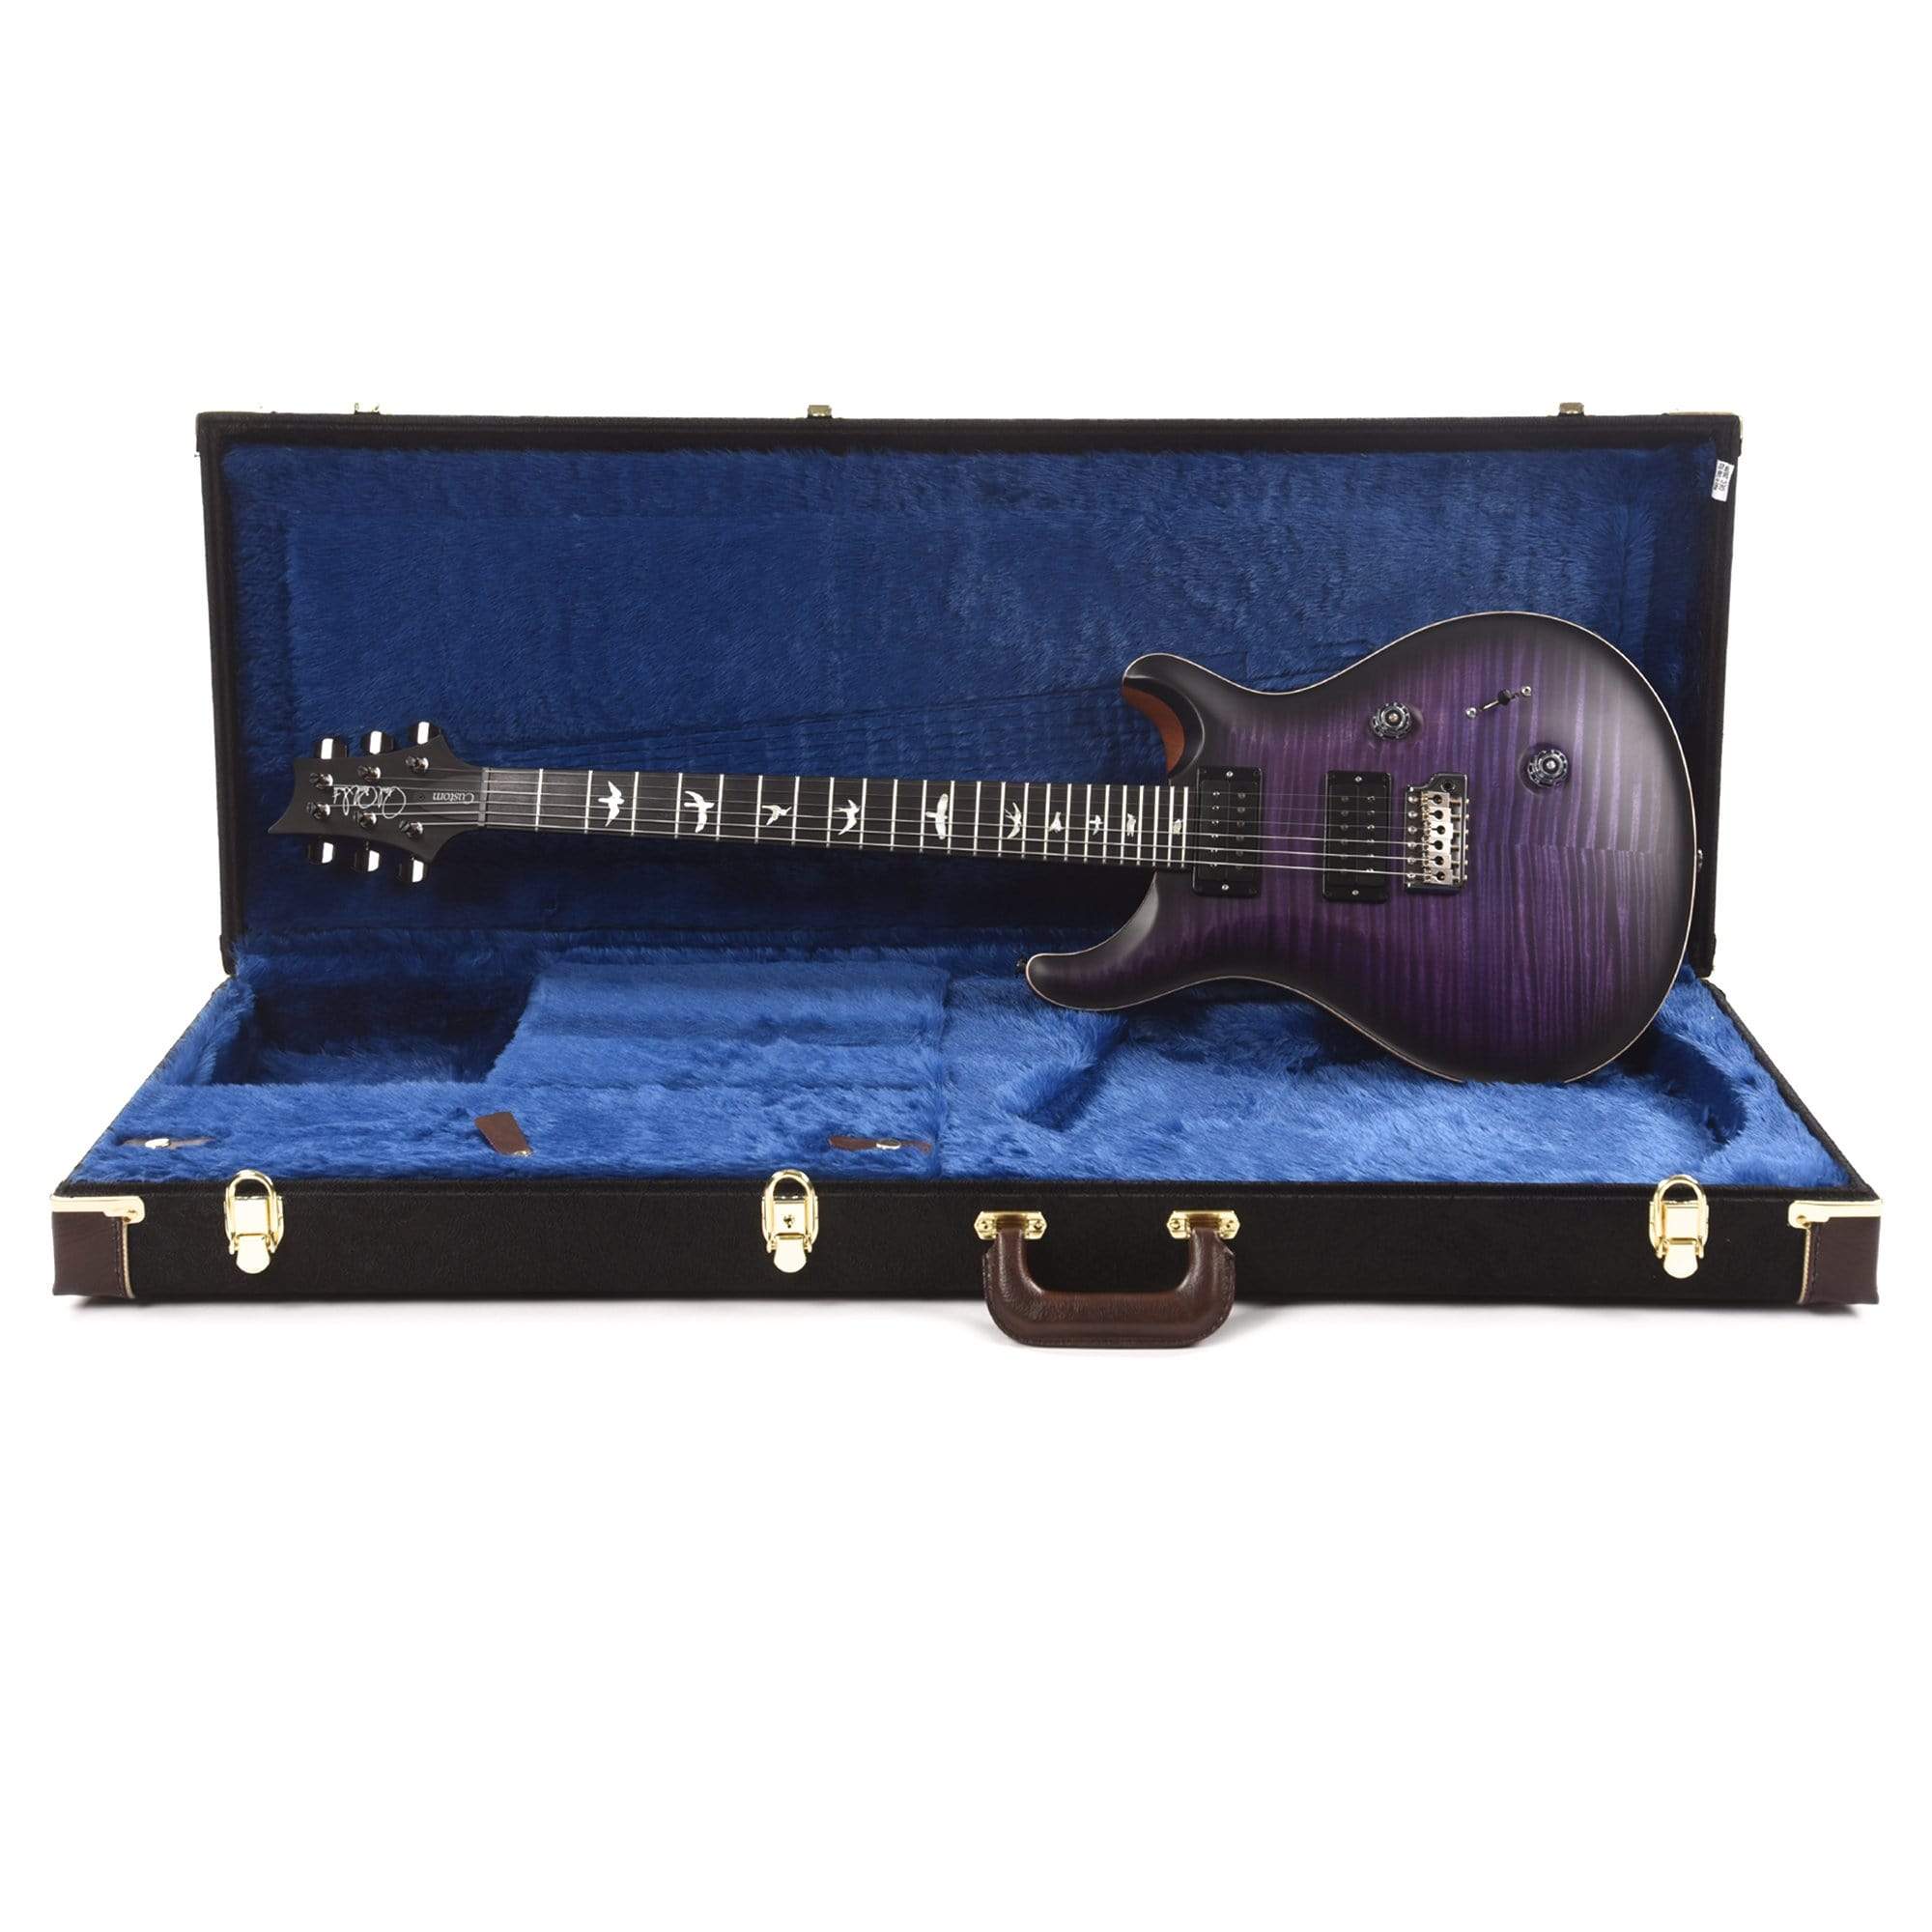 PRS Wood Library Custom 24 10 Top Flame Armando's Amethyst Smokeburst Satin w/Pattern Thin Stained Figured Maple Neck & Ebony Fingerboard Electric Guitars / Solid Body